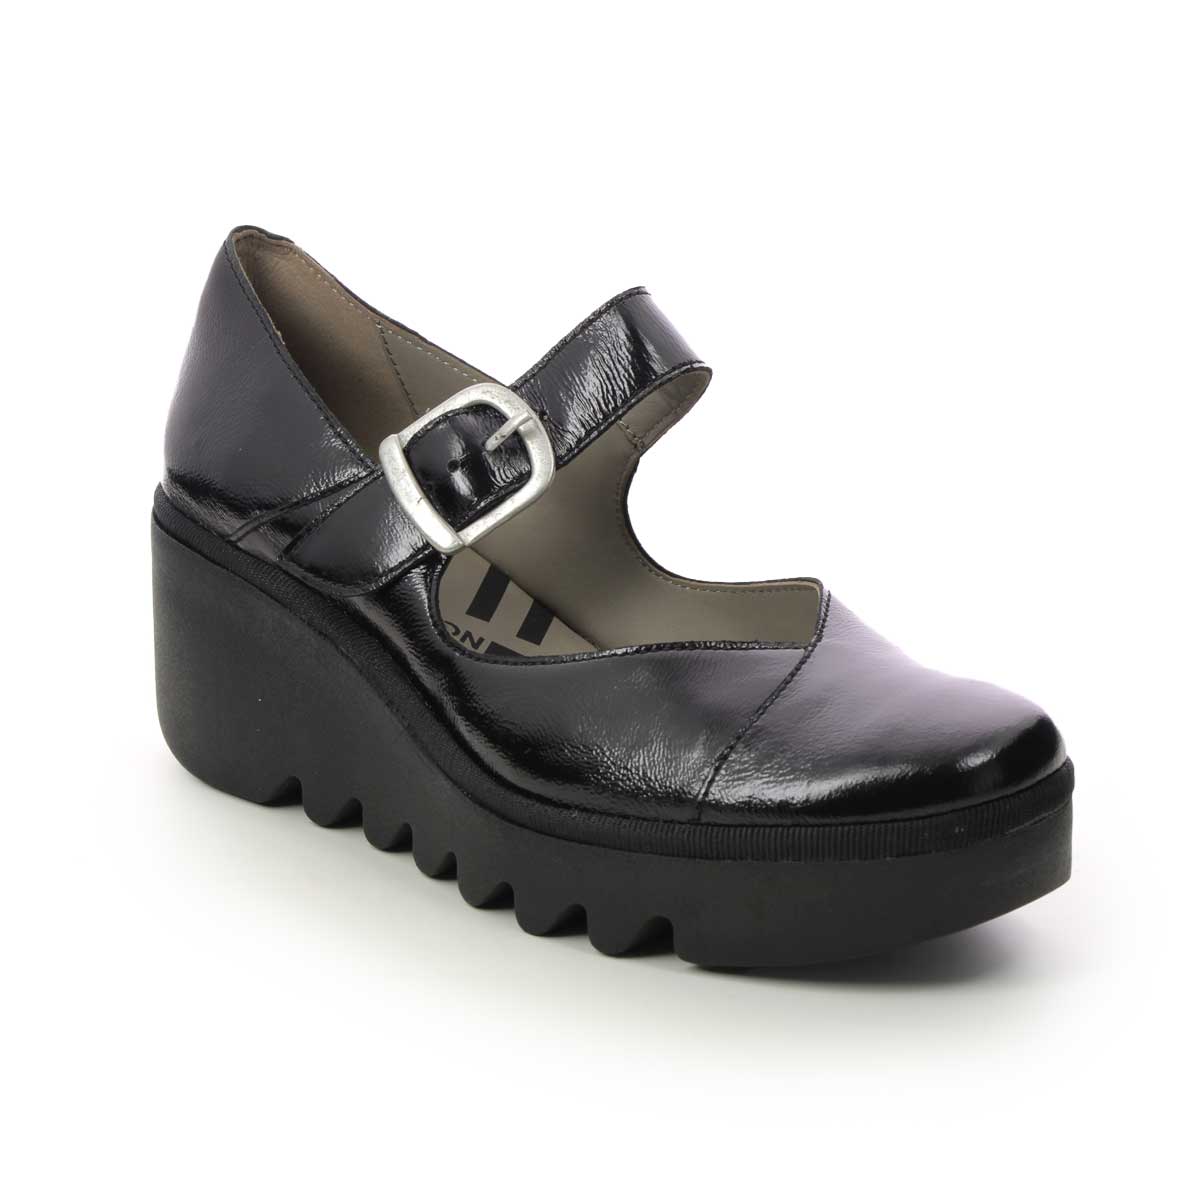 Fly London Baxe   Blu Lmj Black Patent Womens Wedge Shoes P501428 In Size 38 In Plain Black Patent